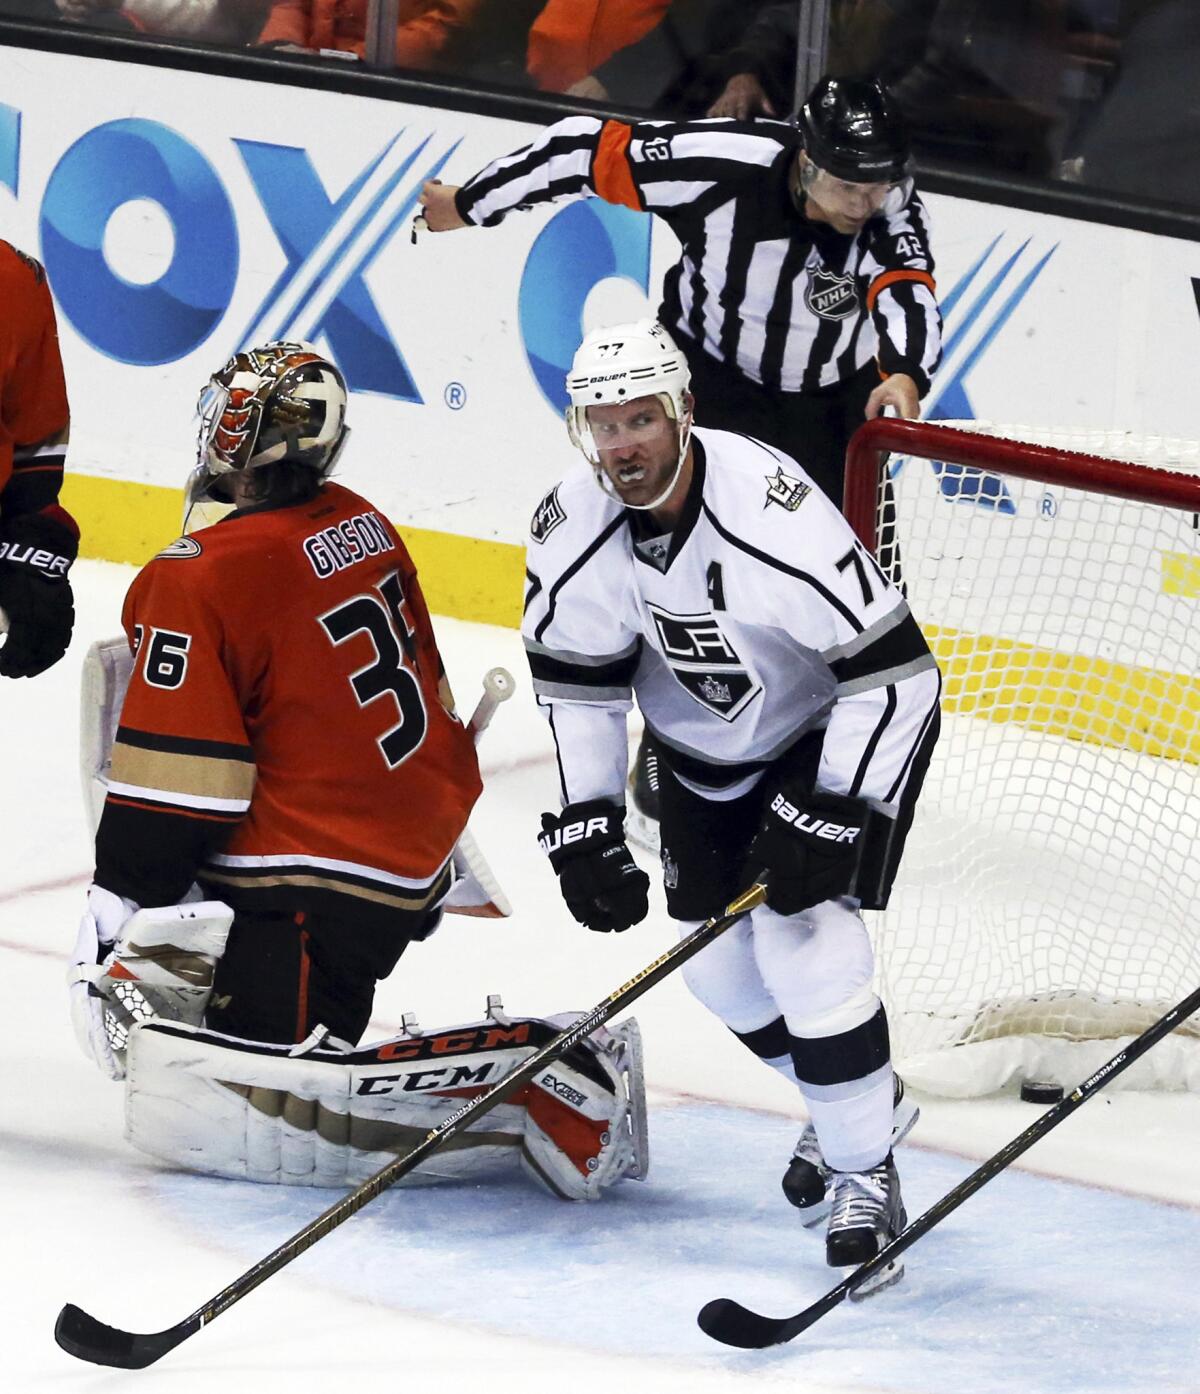 Referee Jake Brenk makes the call as Kings center Jeff Carter (77) scores a goal on Ducks goalie John Gibson (36) in the second period Sunday.